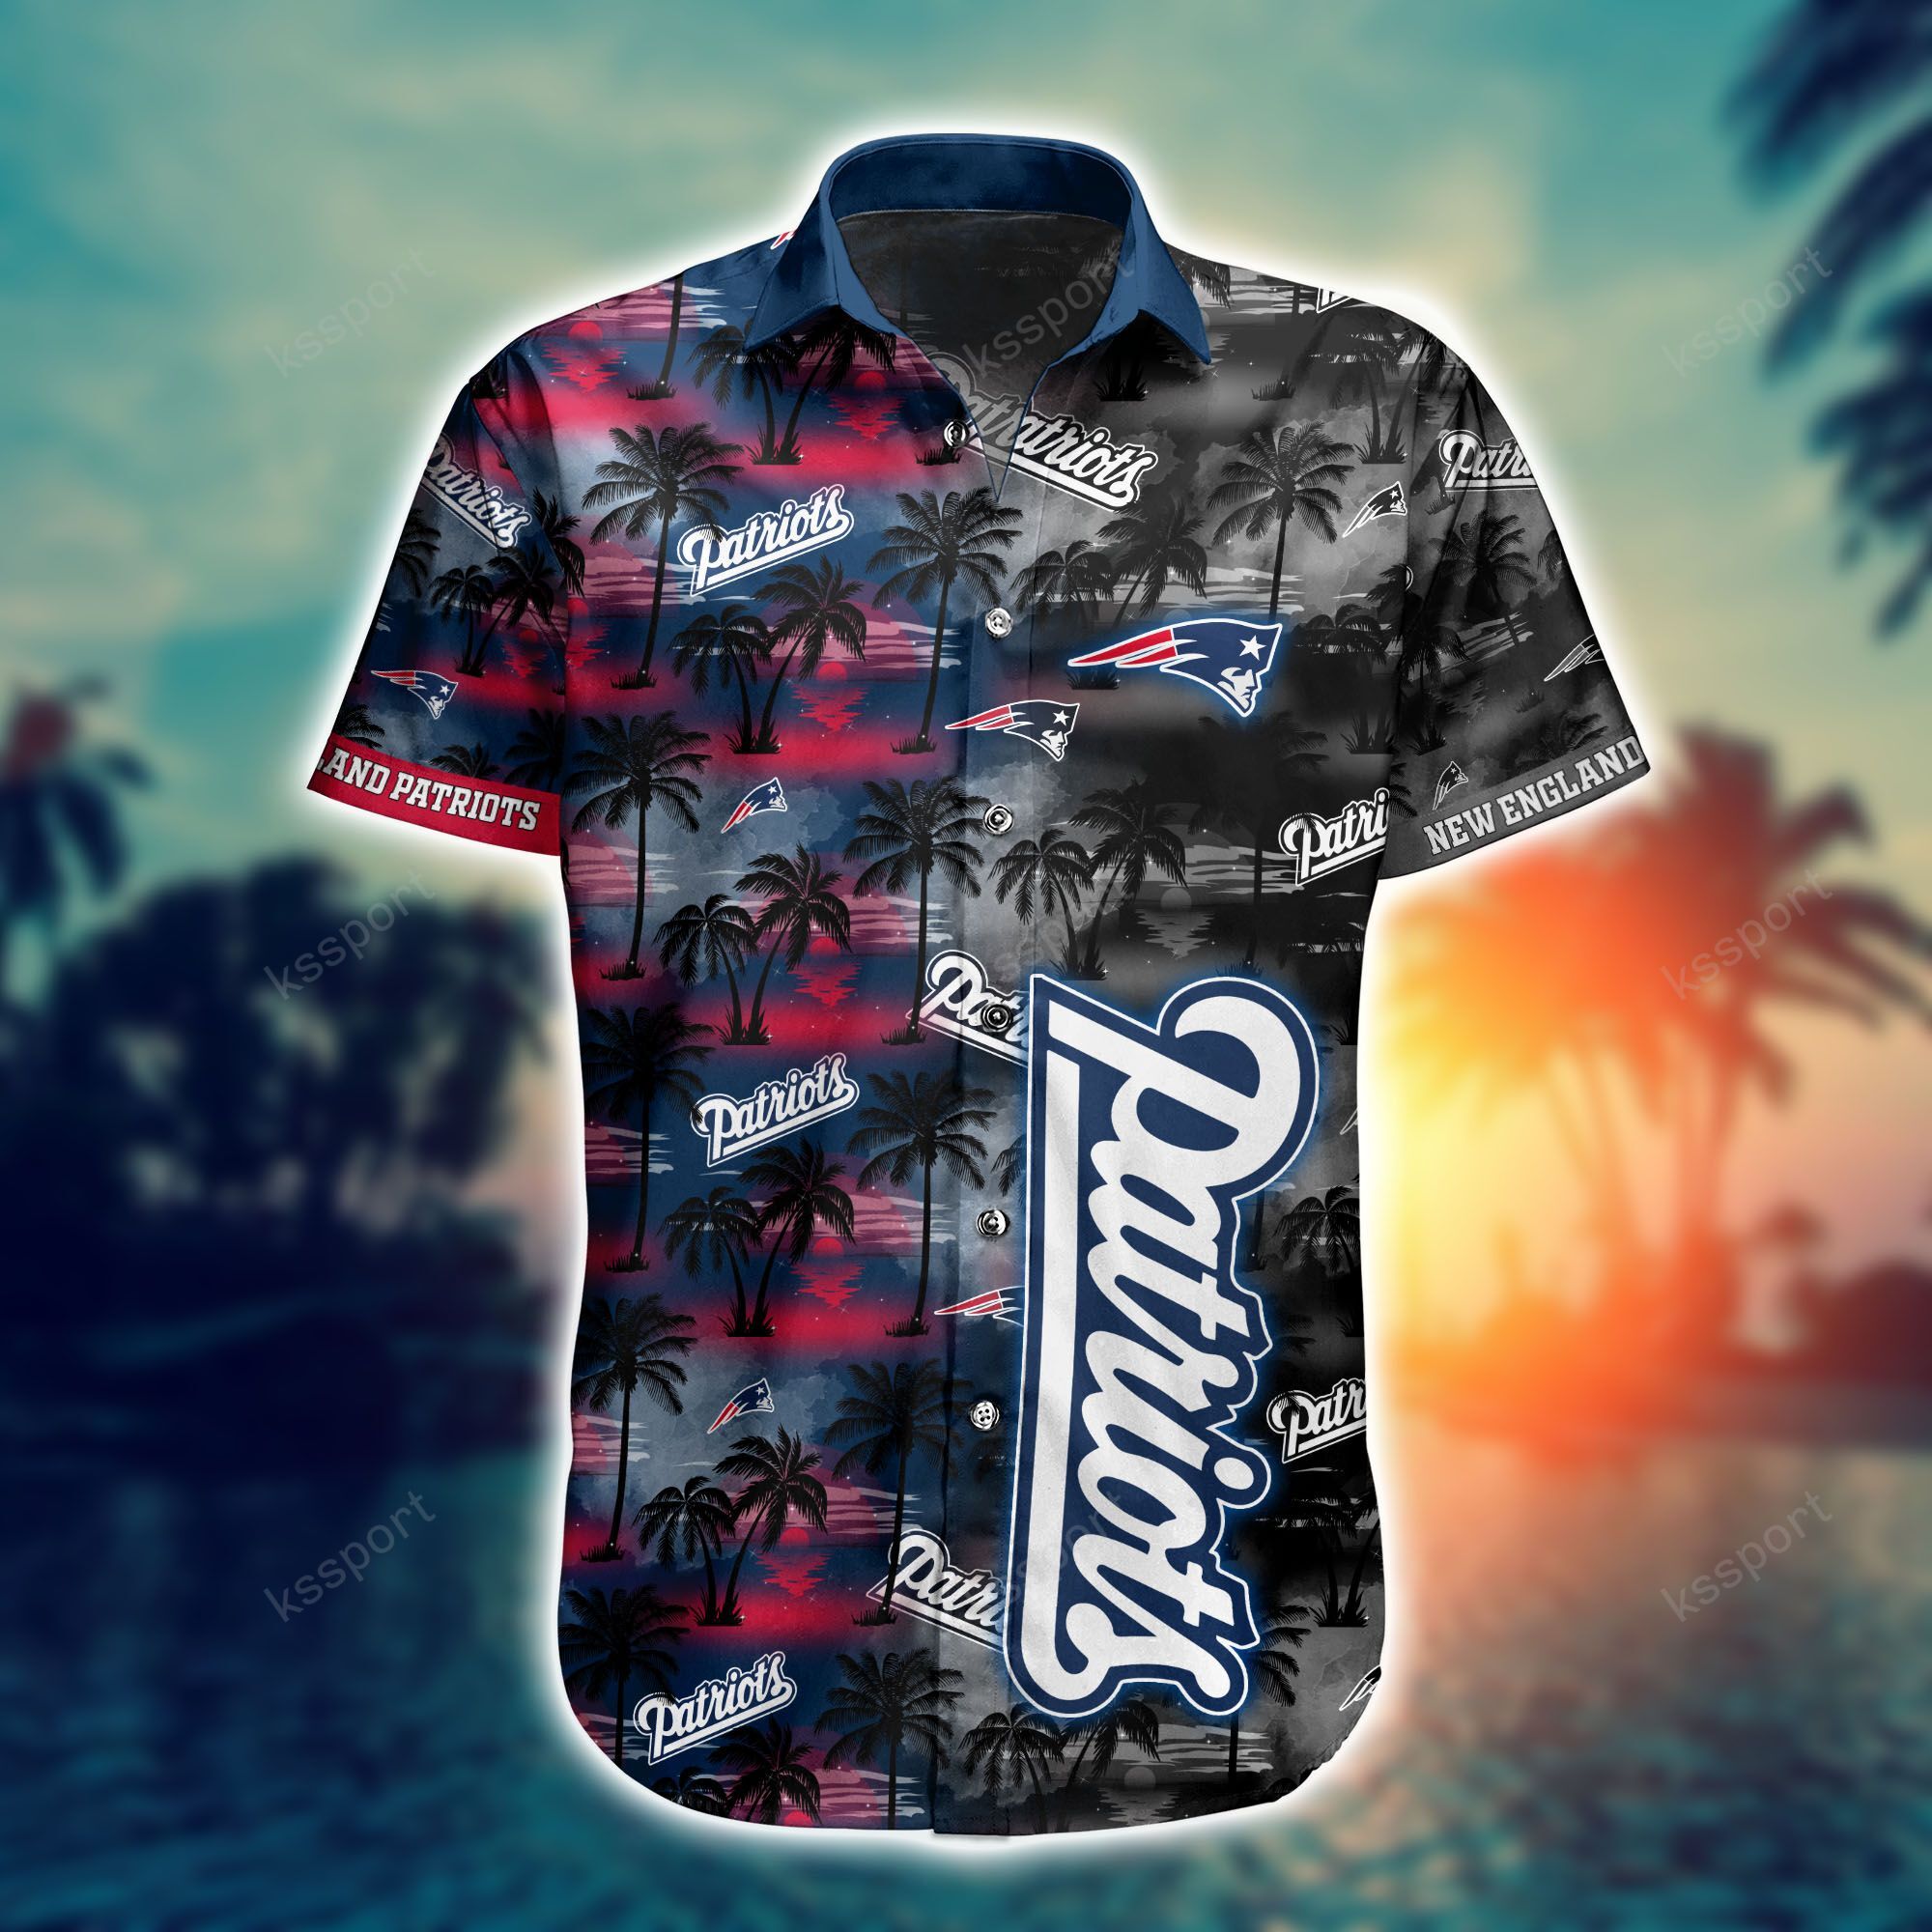 Top cool Hawaiian shirt 2022 - Make sure you get yours today before they run out! 196